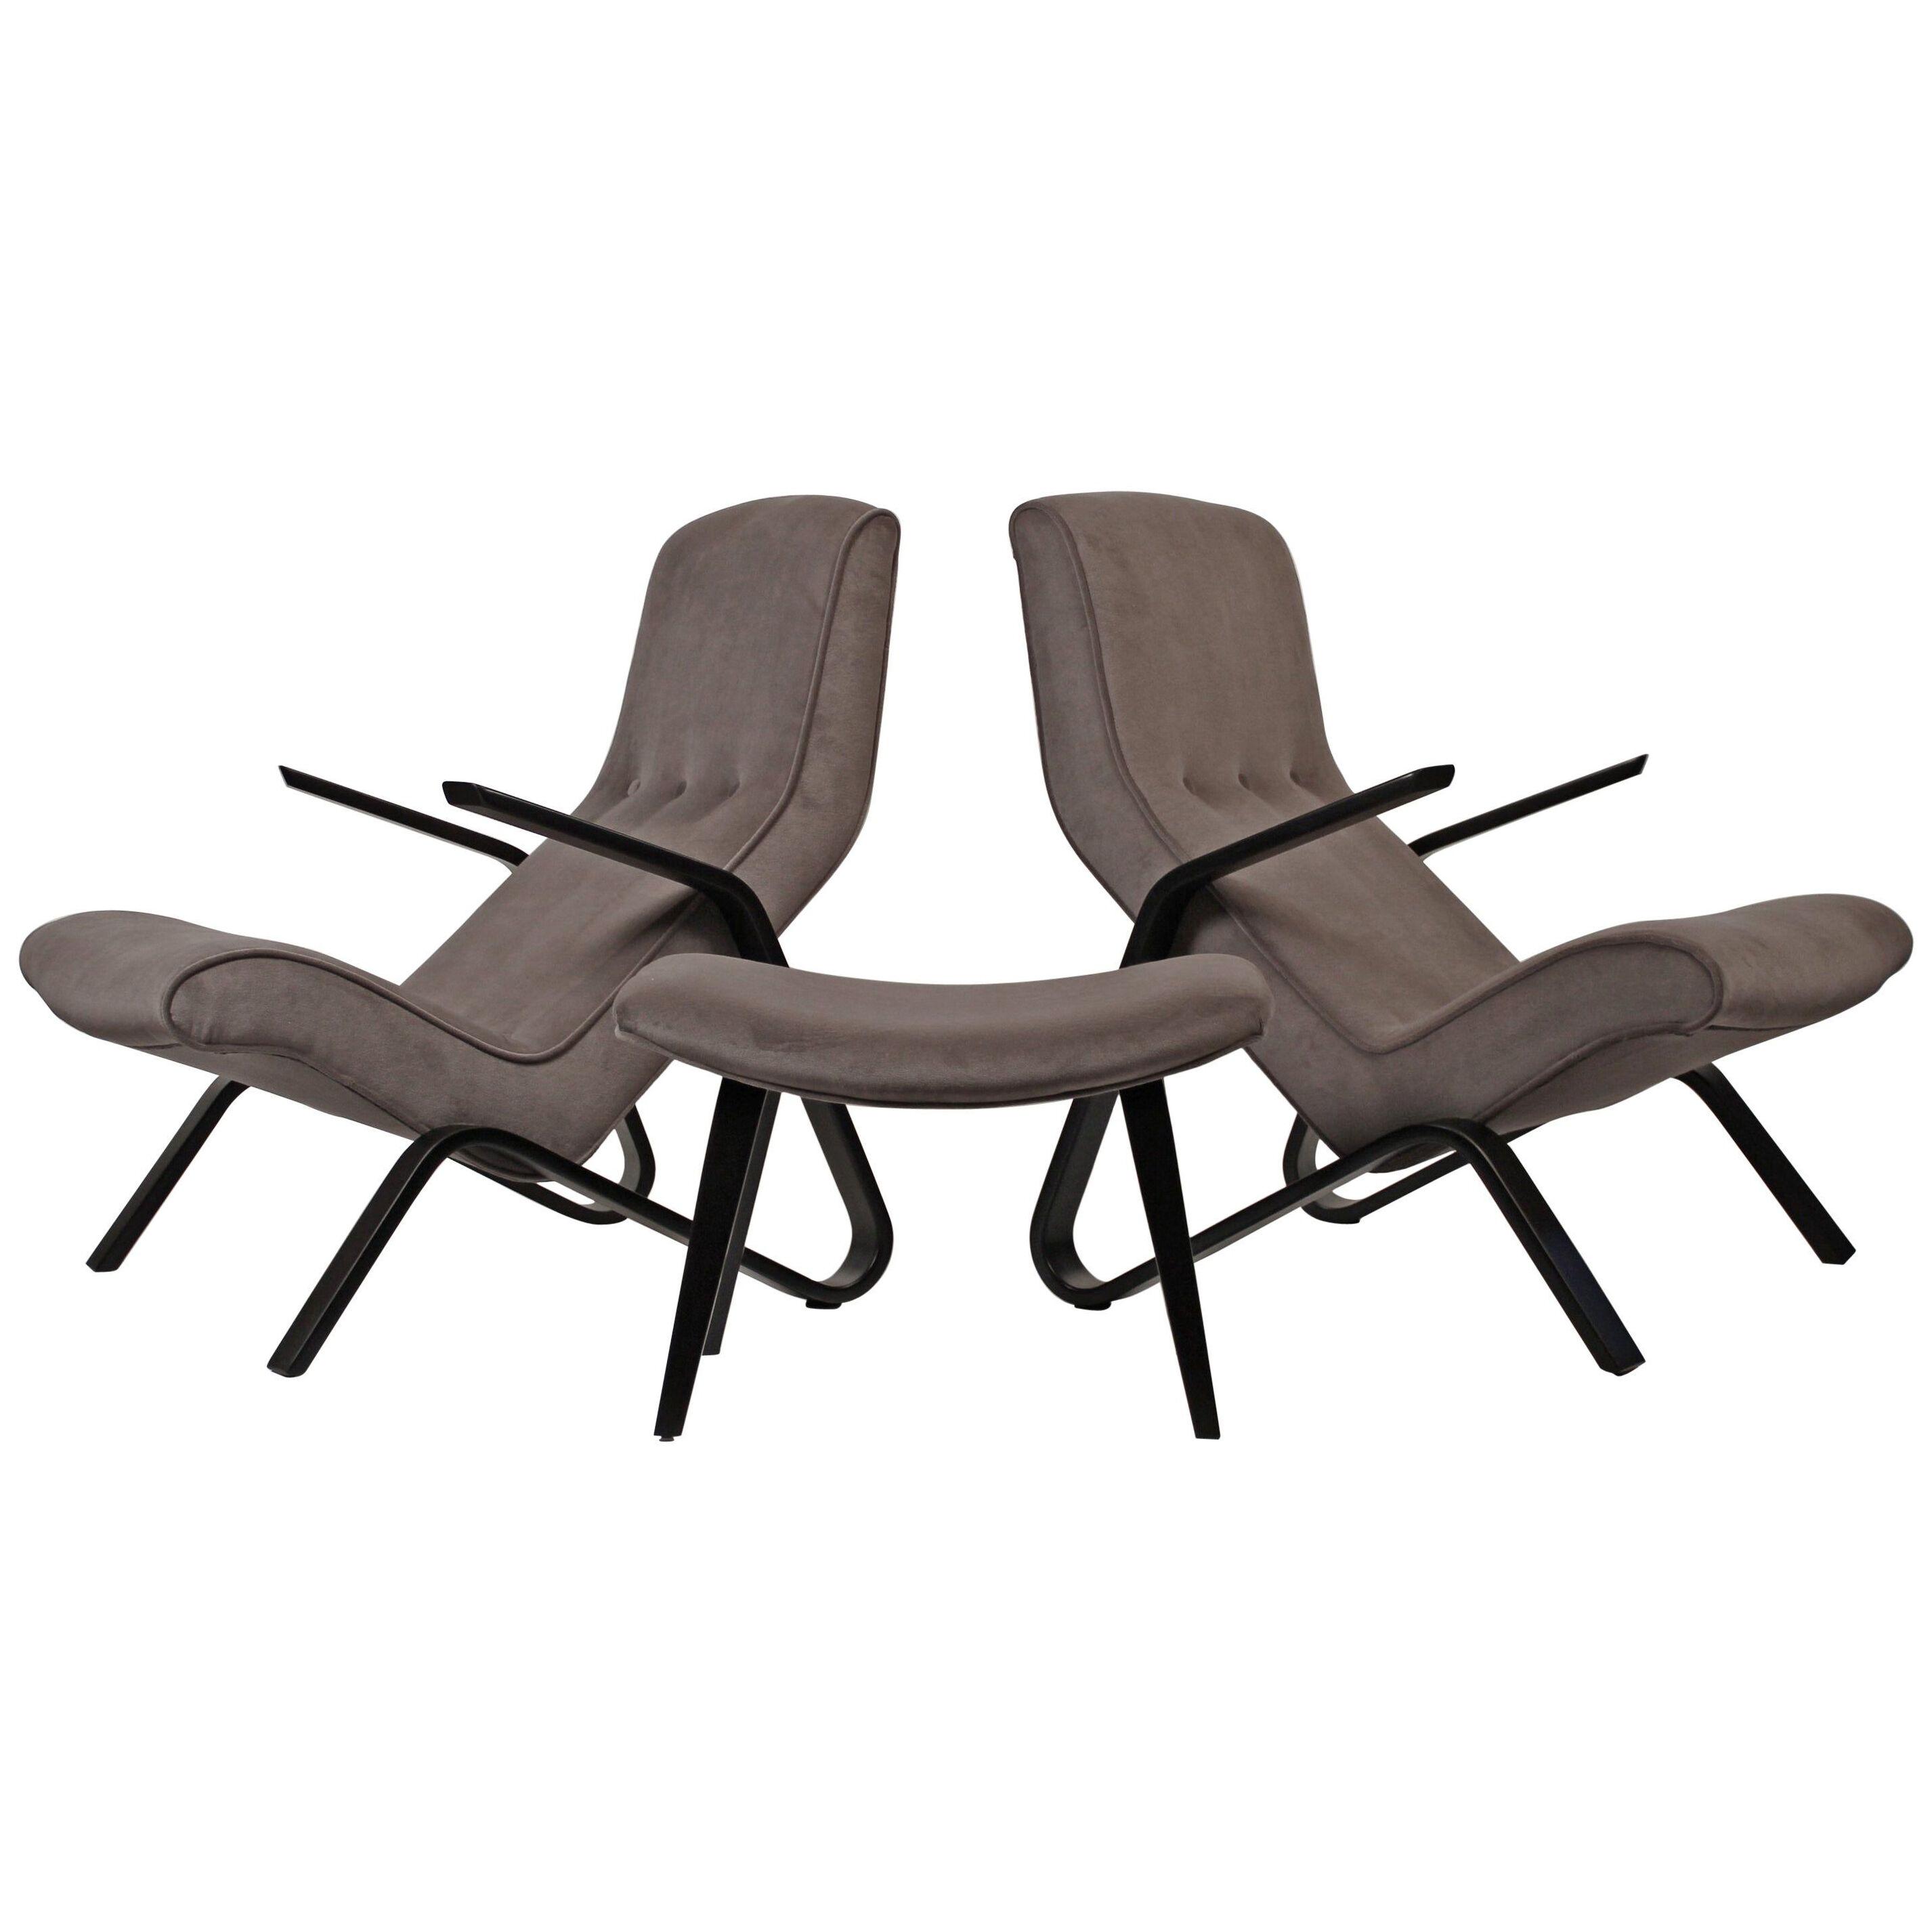 Pair of Early Eero Saarinen Grasshopper Chairs for Knoll with Rare Black Frames